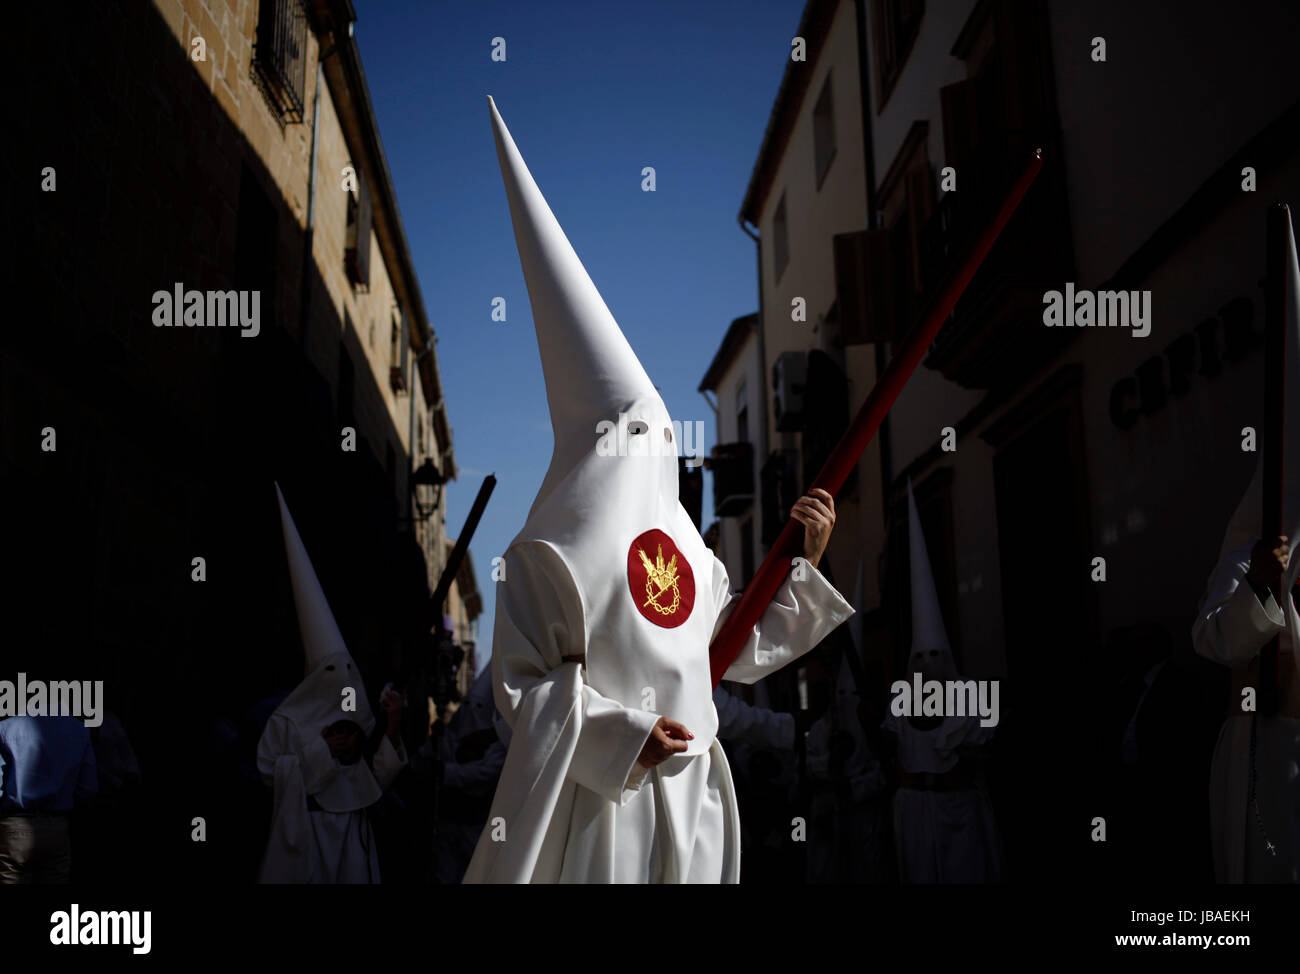 A penitente wearing a white pointer hood during Easter Week celebrations in Baeza, Jaen Province, Andalusia, Spain Stock Photo